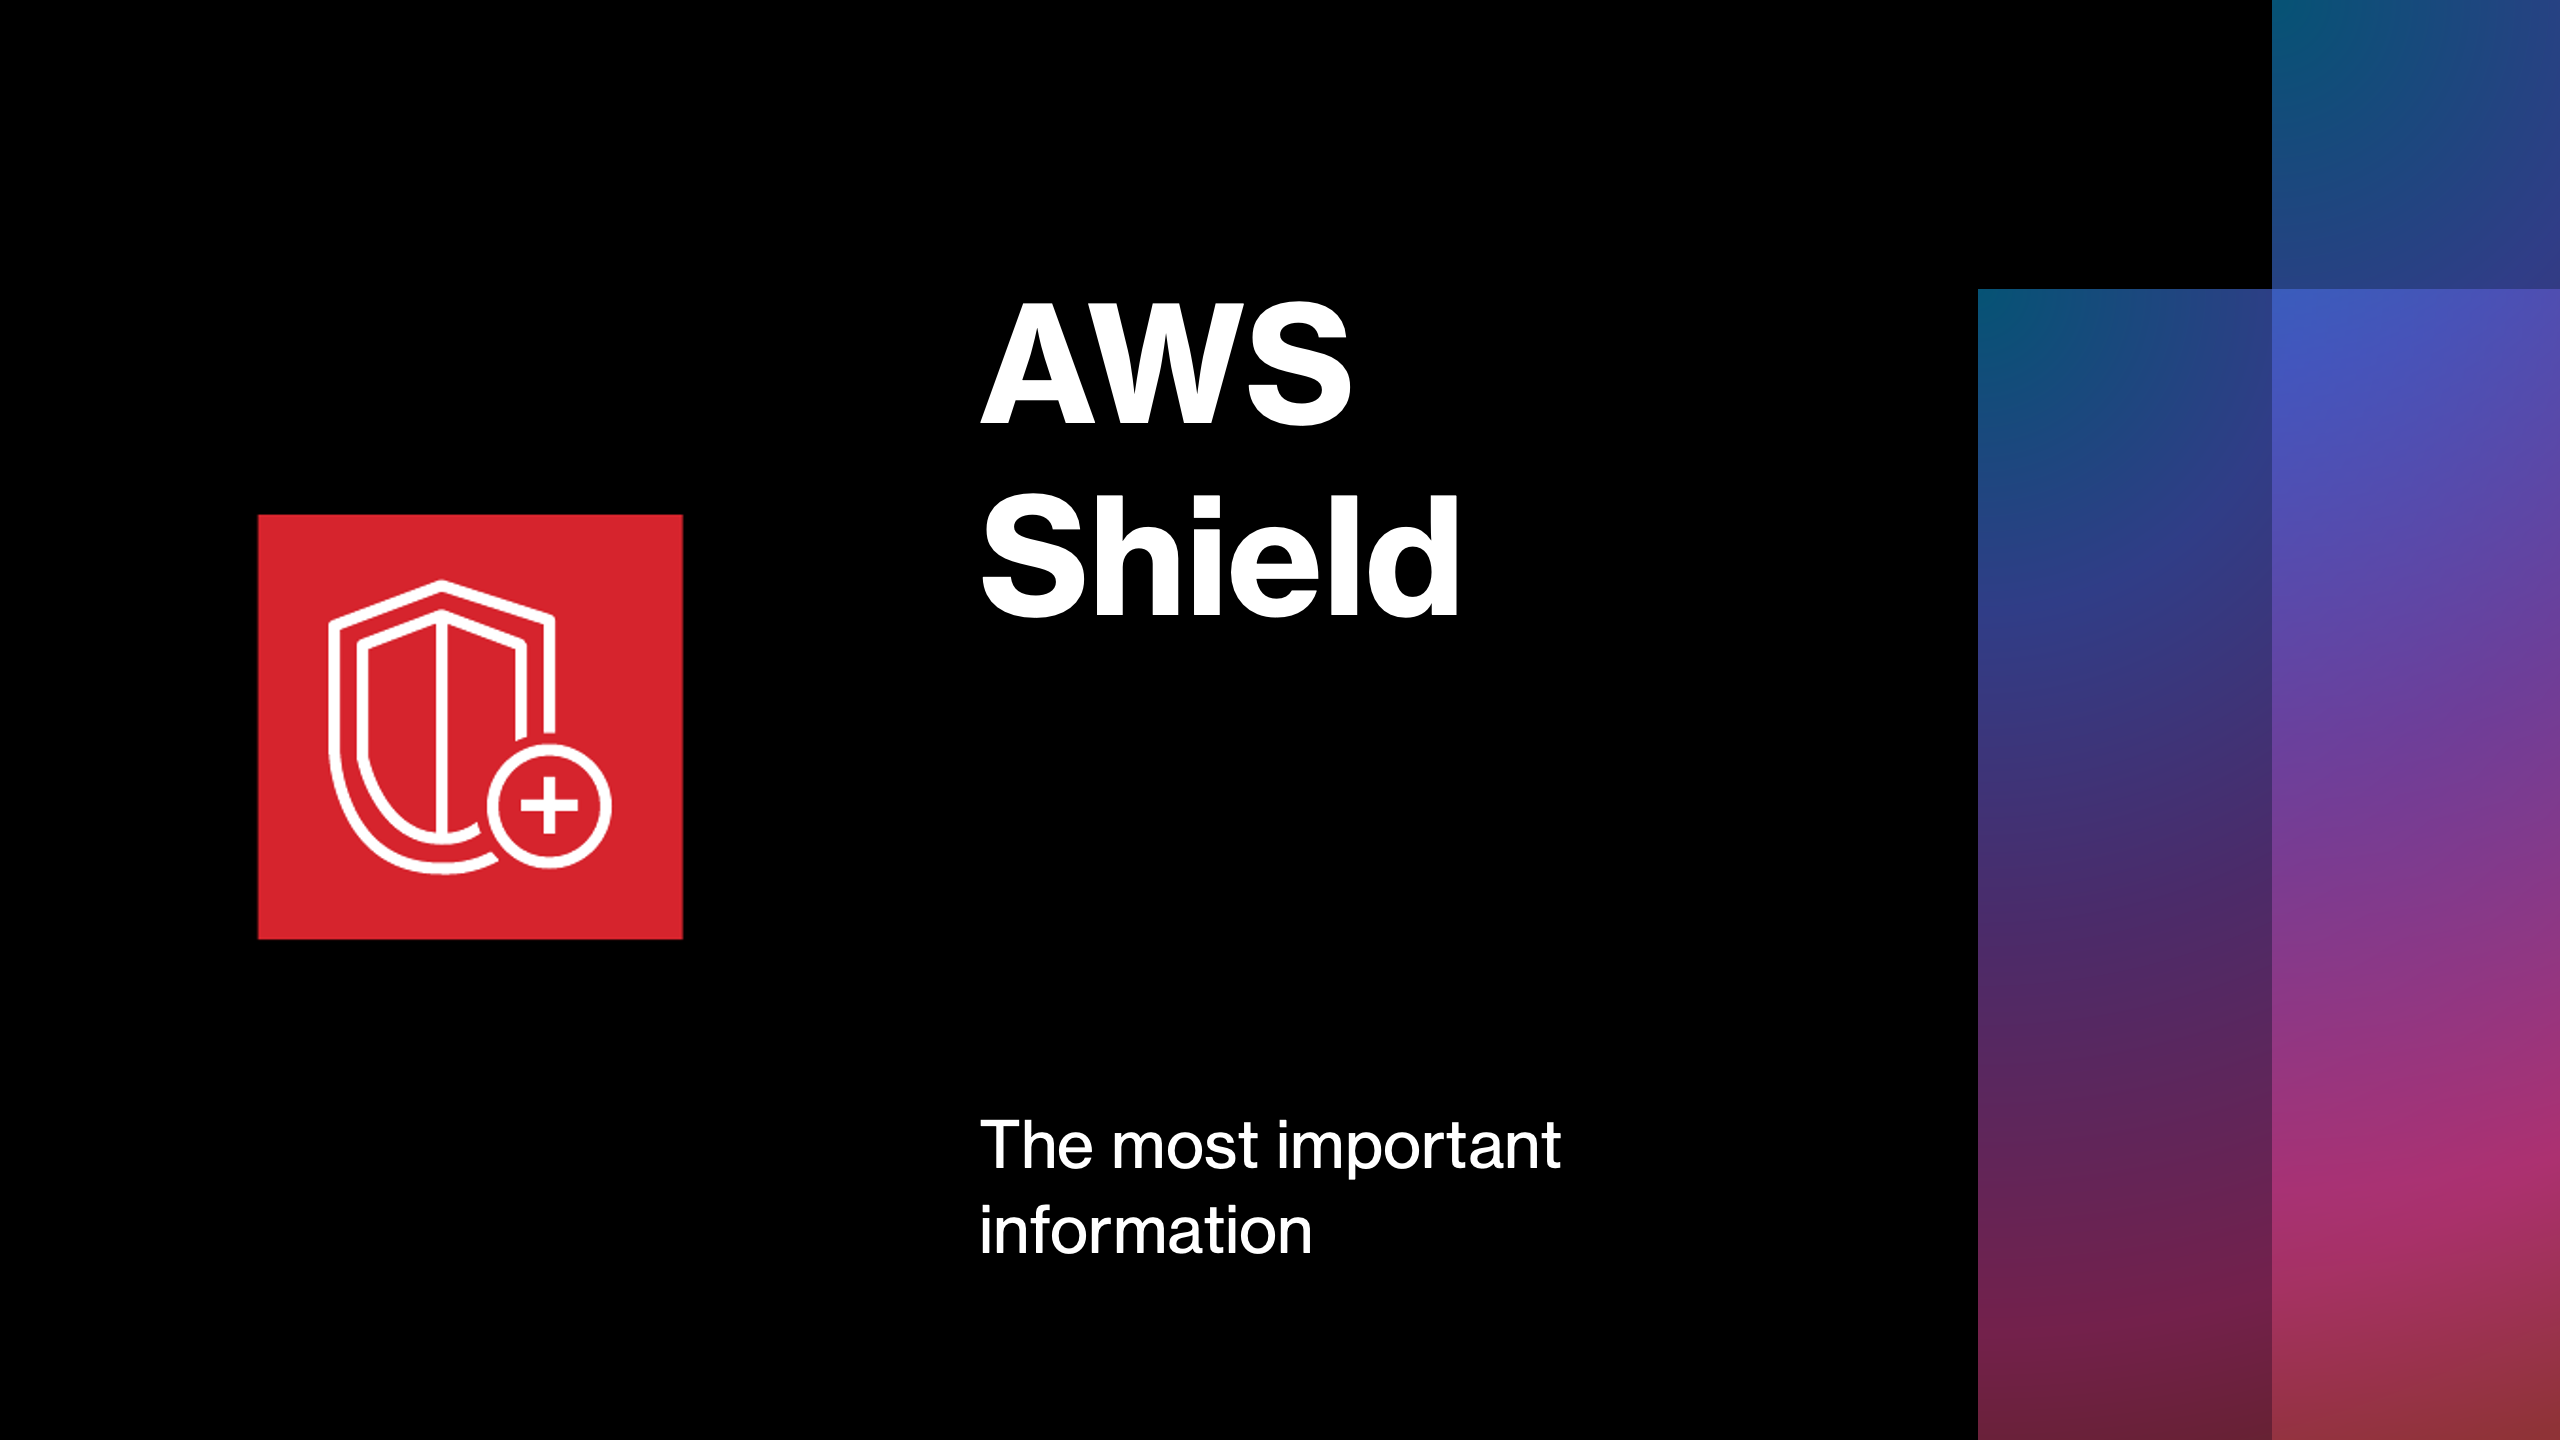 AWS Shield - The most important information